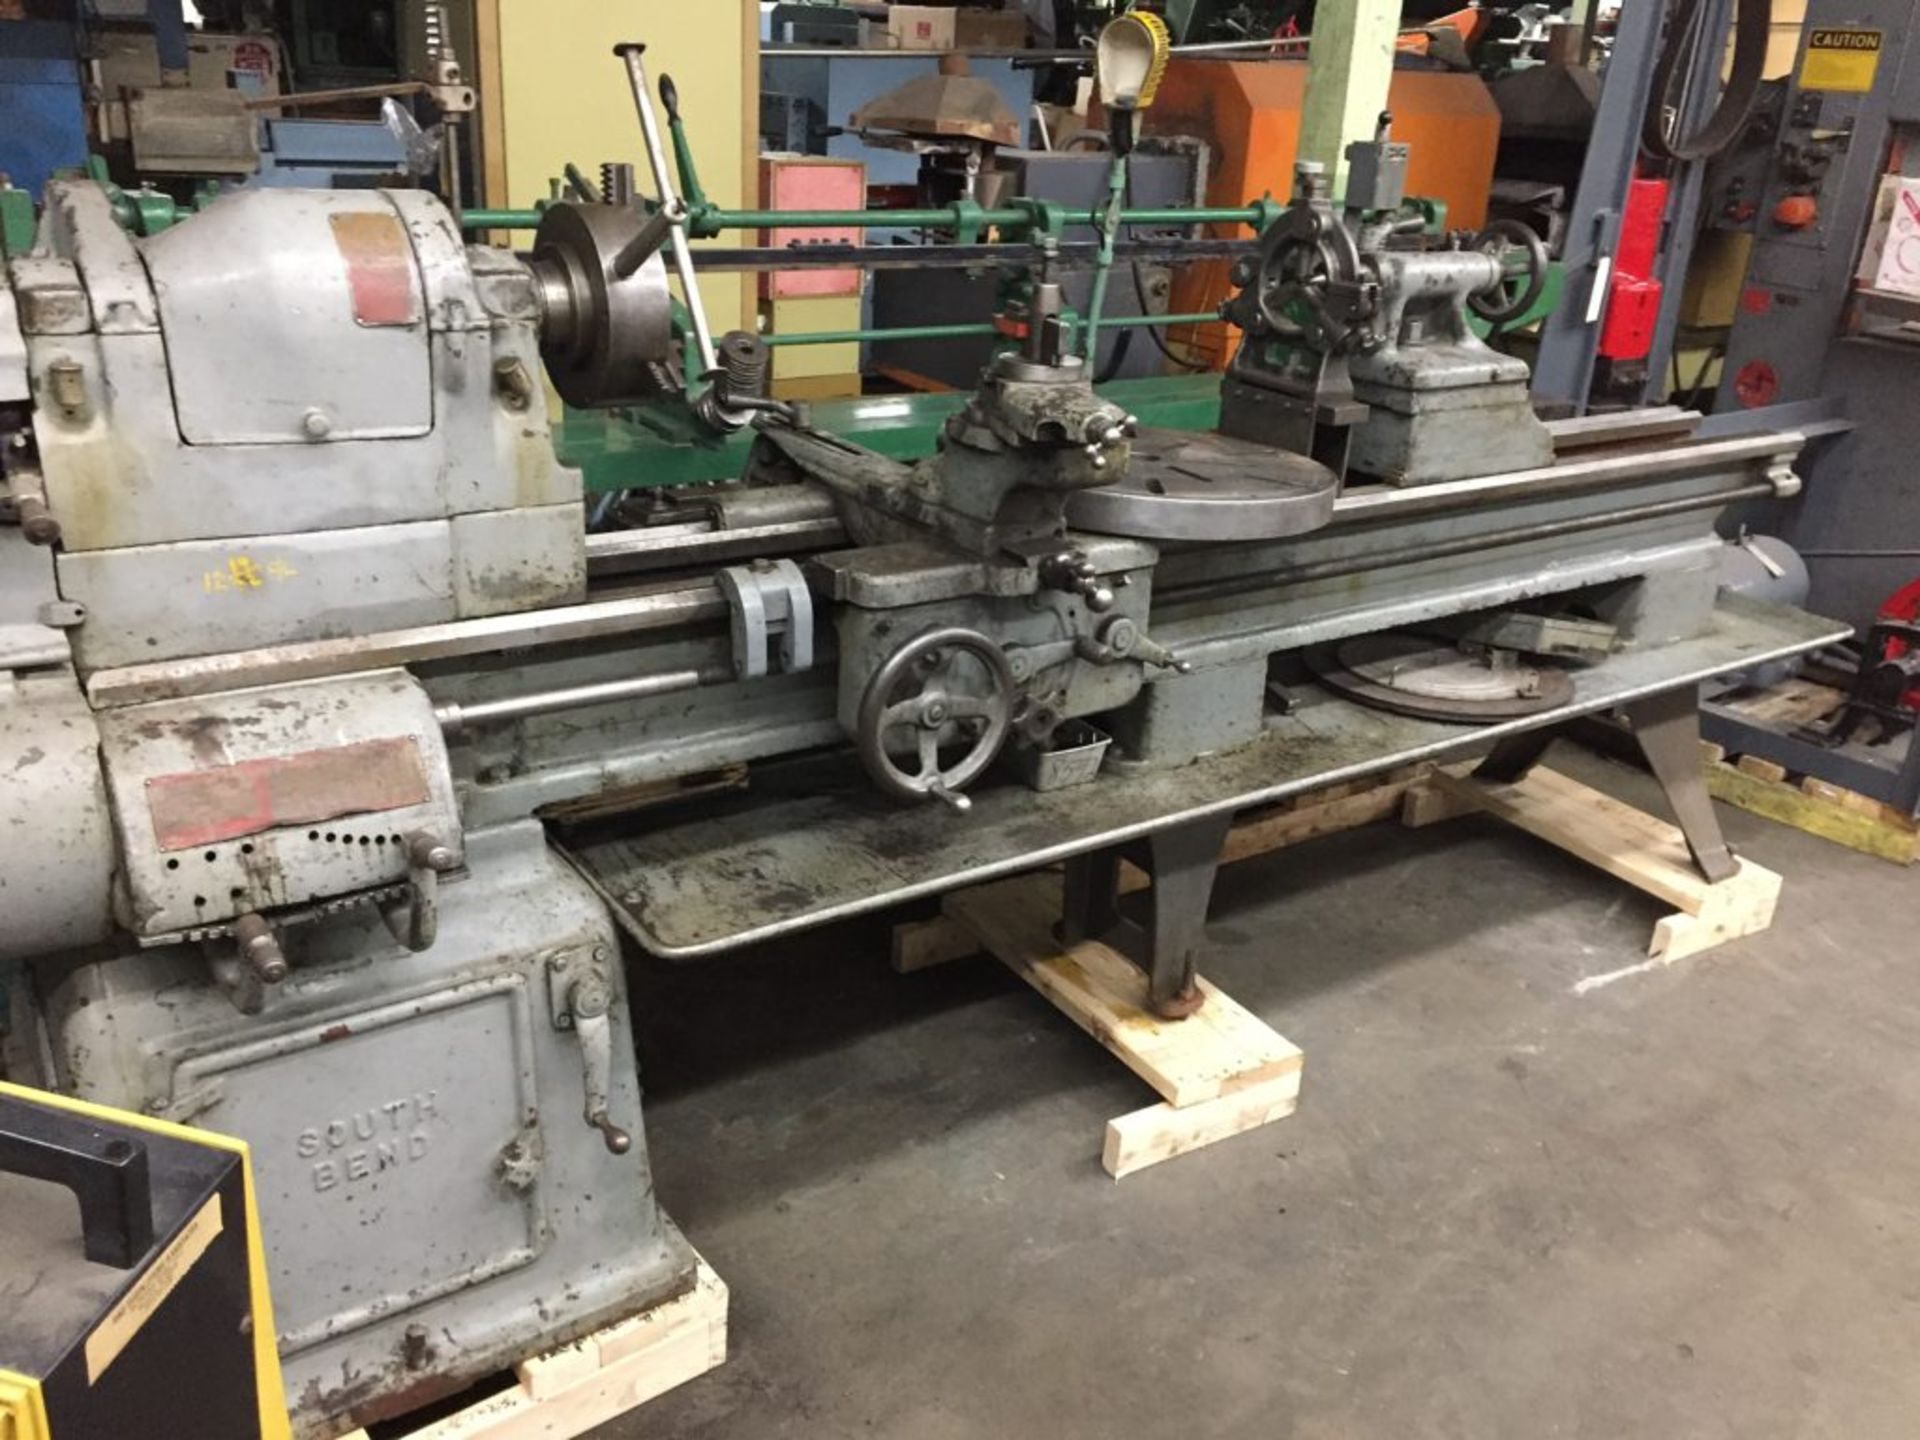 SOUTHBEND 25" X 78" PRECISION METAL CUTTING LATHE - Image 2 of 9